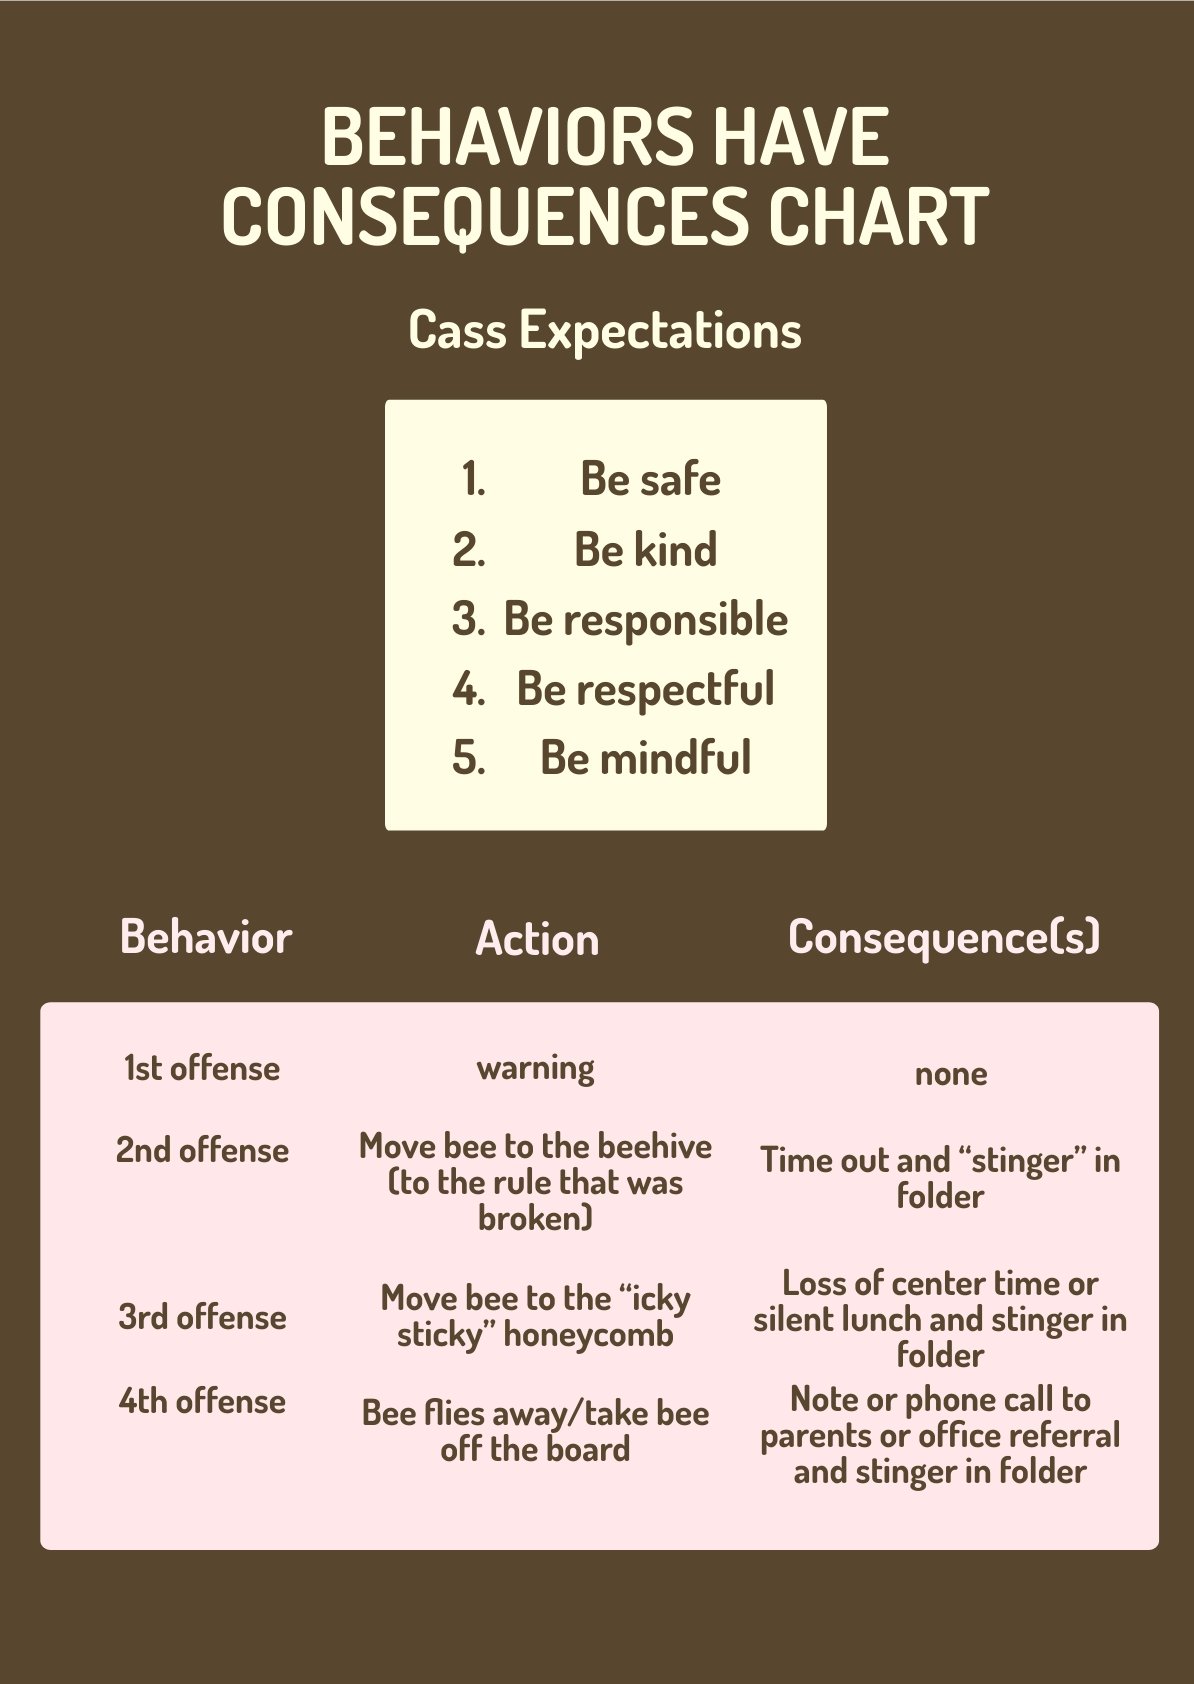 Behaviors Have Consequences Chart in PDF, Illustrator